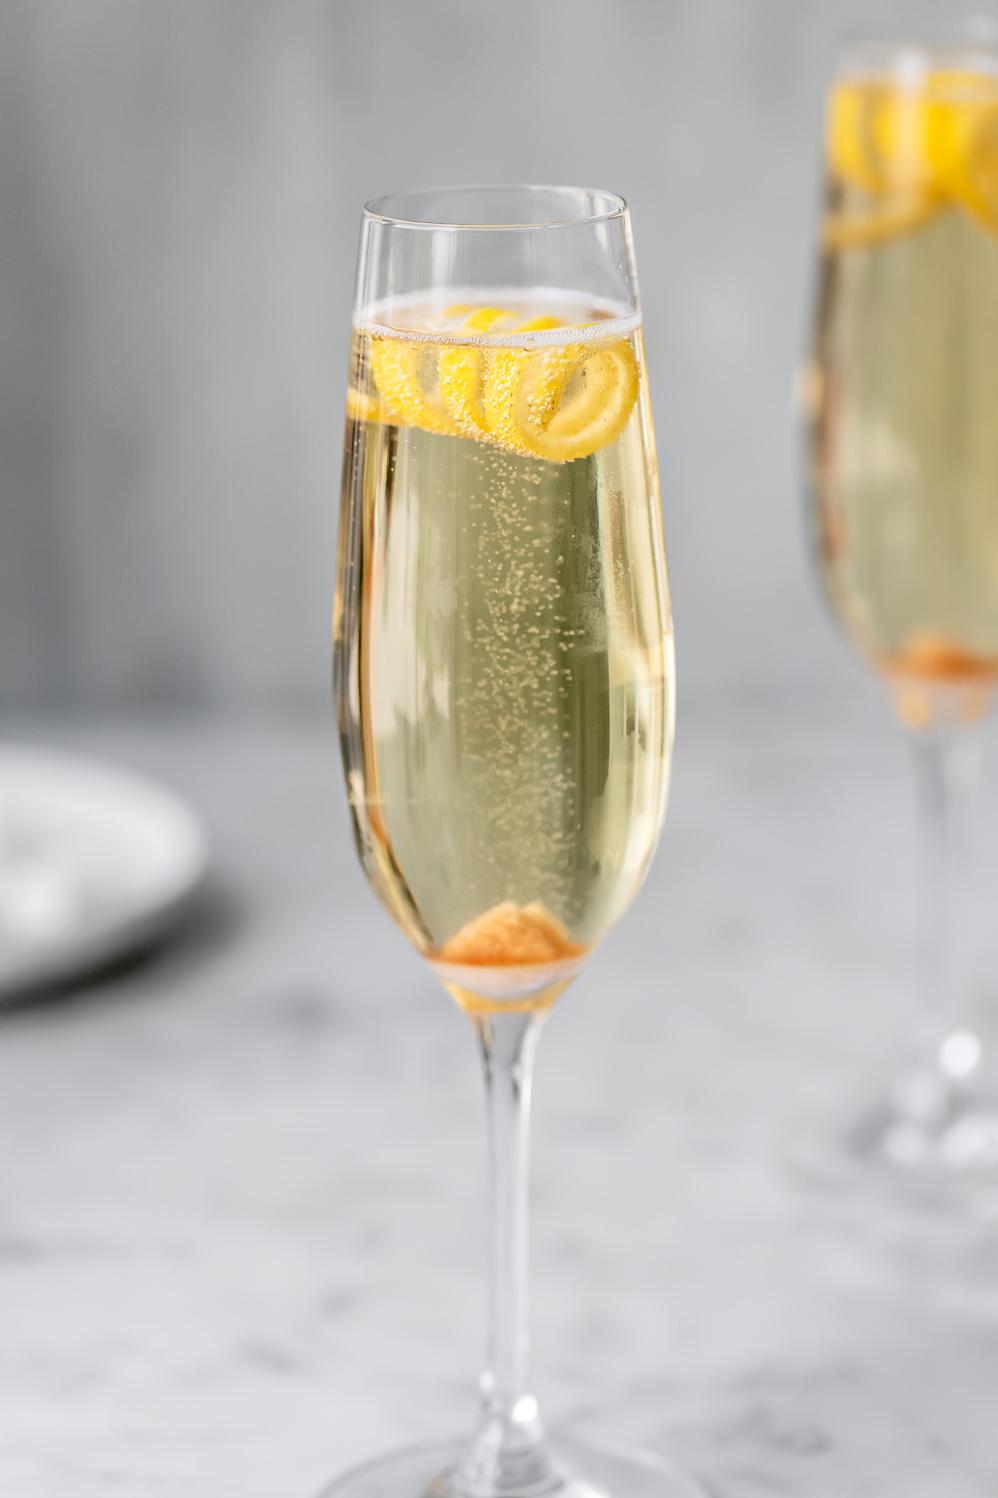  Toasting to new beginnings with a champagne cocktail.